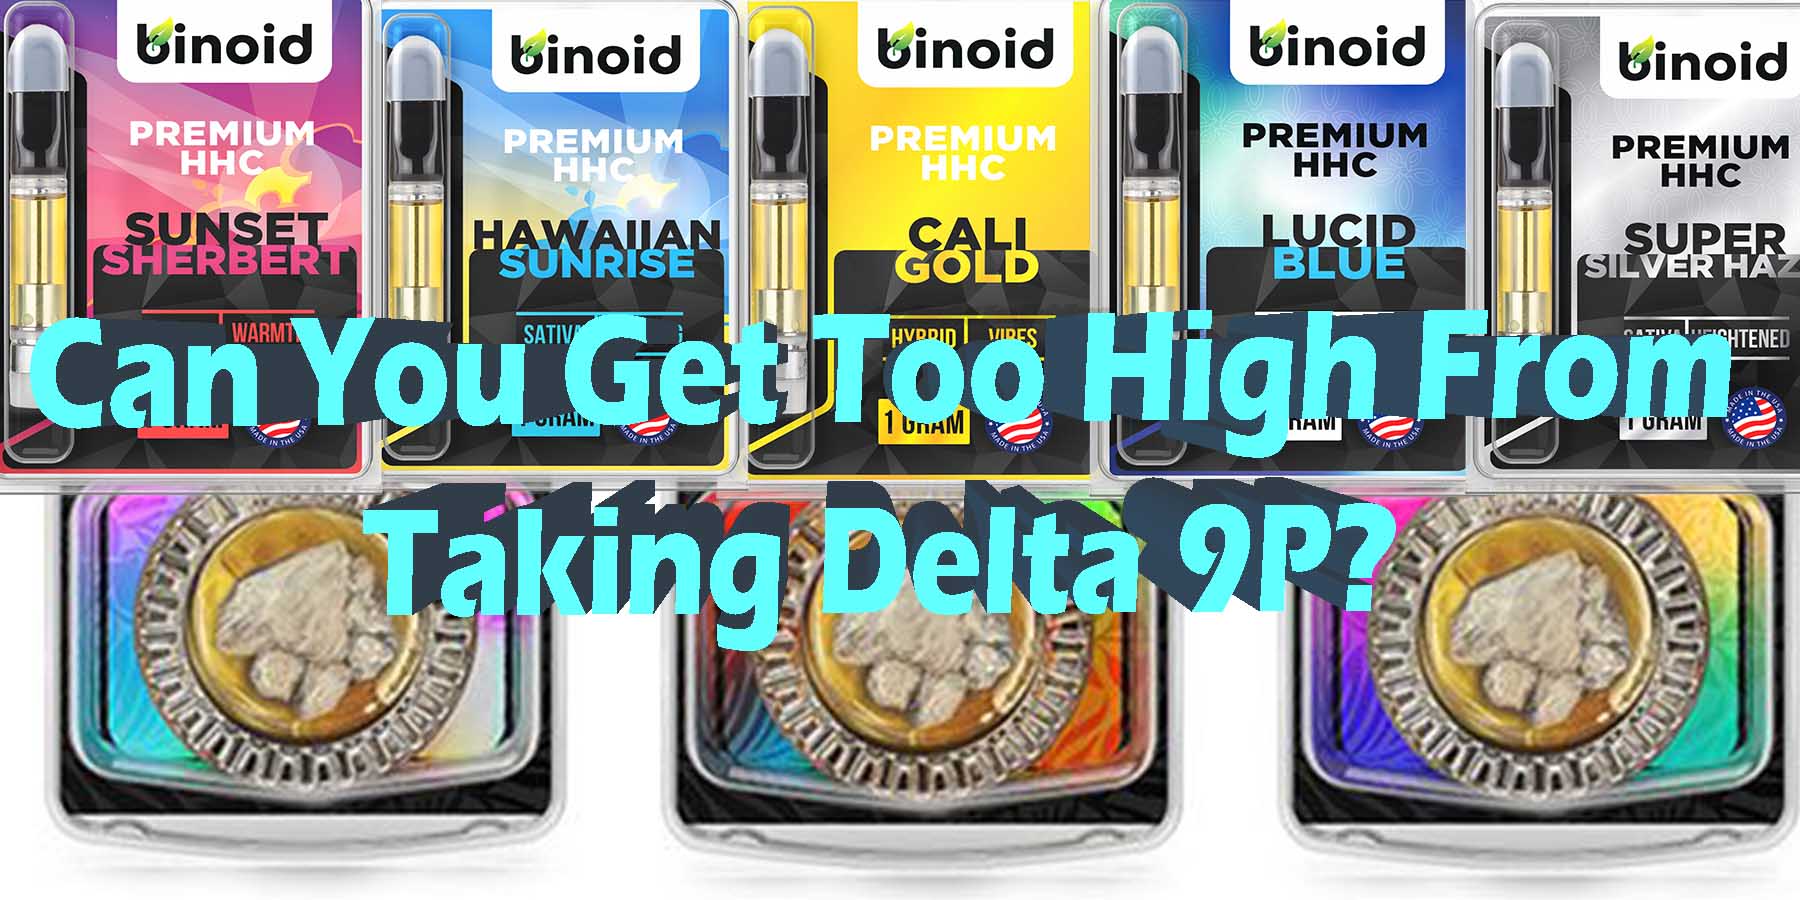 Can You Get Too High From Taking Delta 9P WhereToGet HowToBuy BestPrice GetNearMe Lowest Coupon DiscountStore ShopOnline Quality Legal Binoid For Sale Review